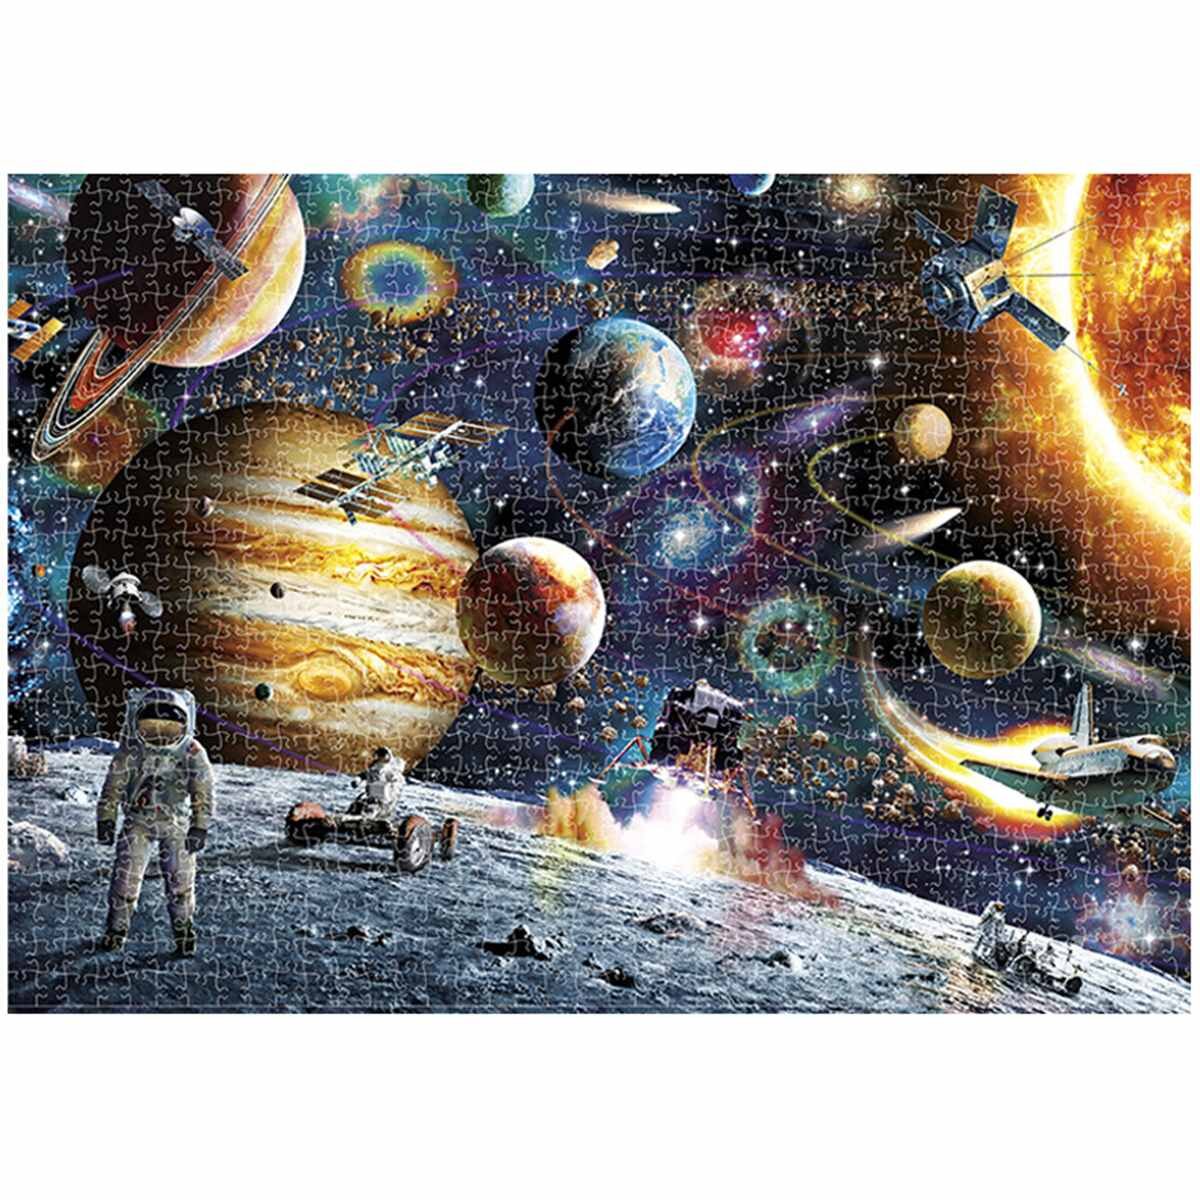 1000 Pieces Space Traveler DIY Assembly Jigsaw Puzzles Landscape Picture Educational Games Toy for Adults Children Prett